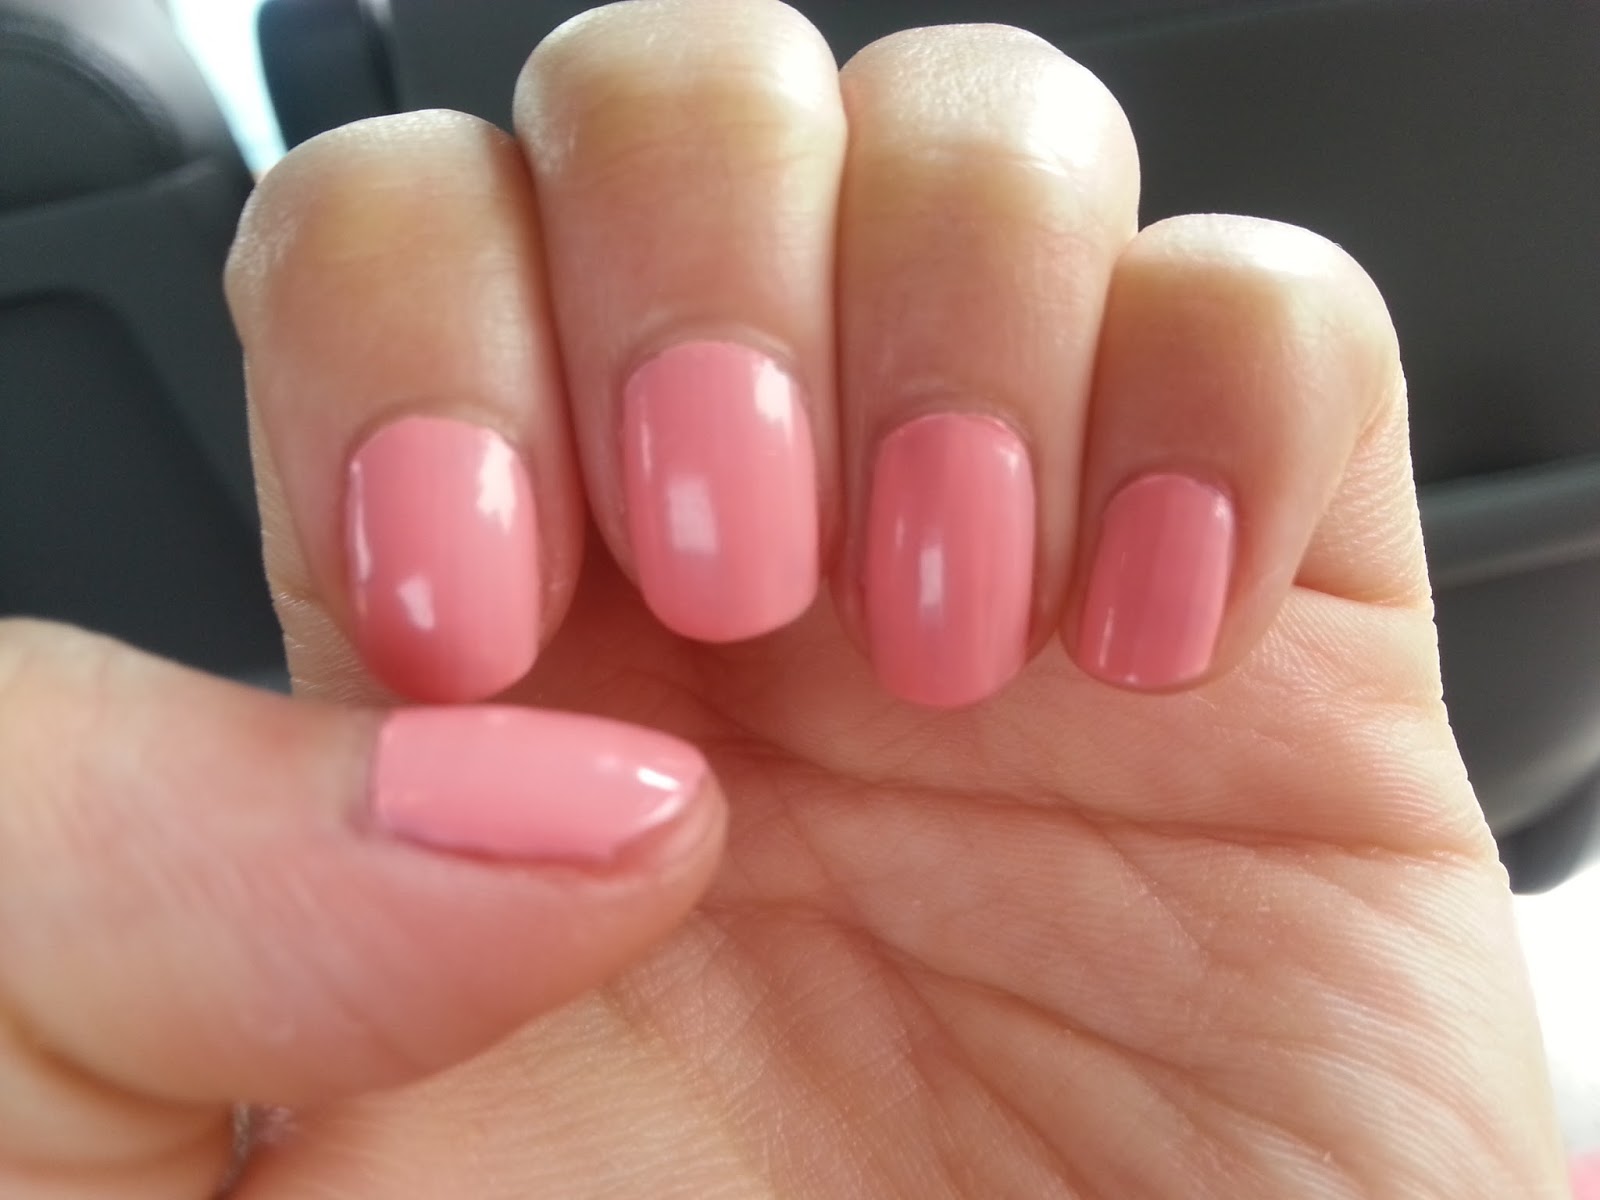 9. Orly Nail Lacquer in "Cotton Candy" - wide 10